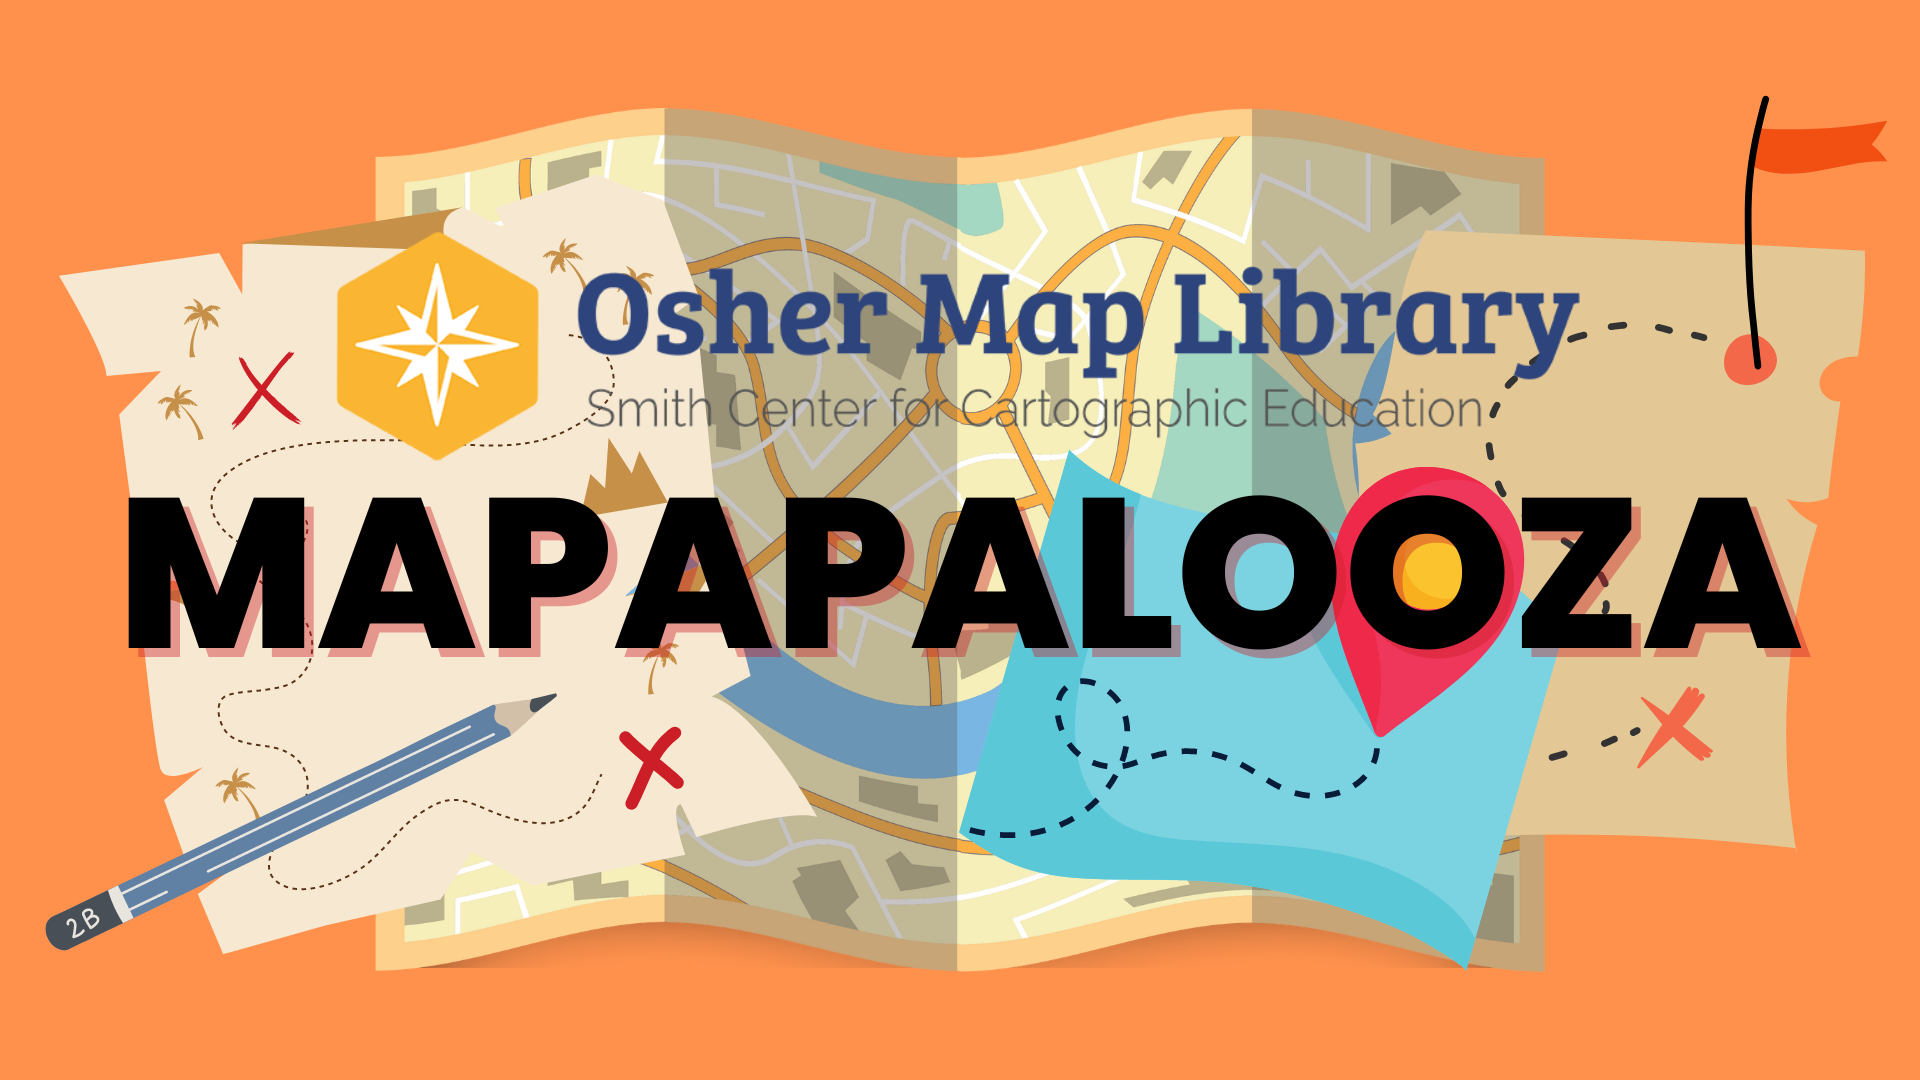 OML Mapapalooza Banner with a collage of maps and a pencil